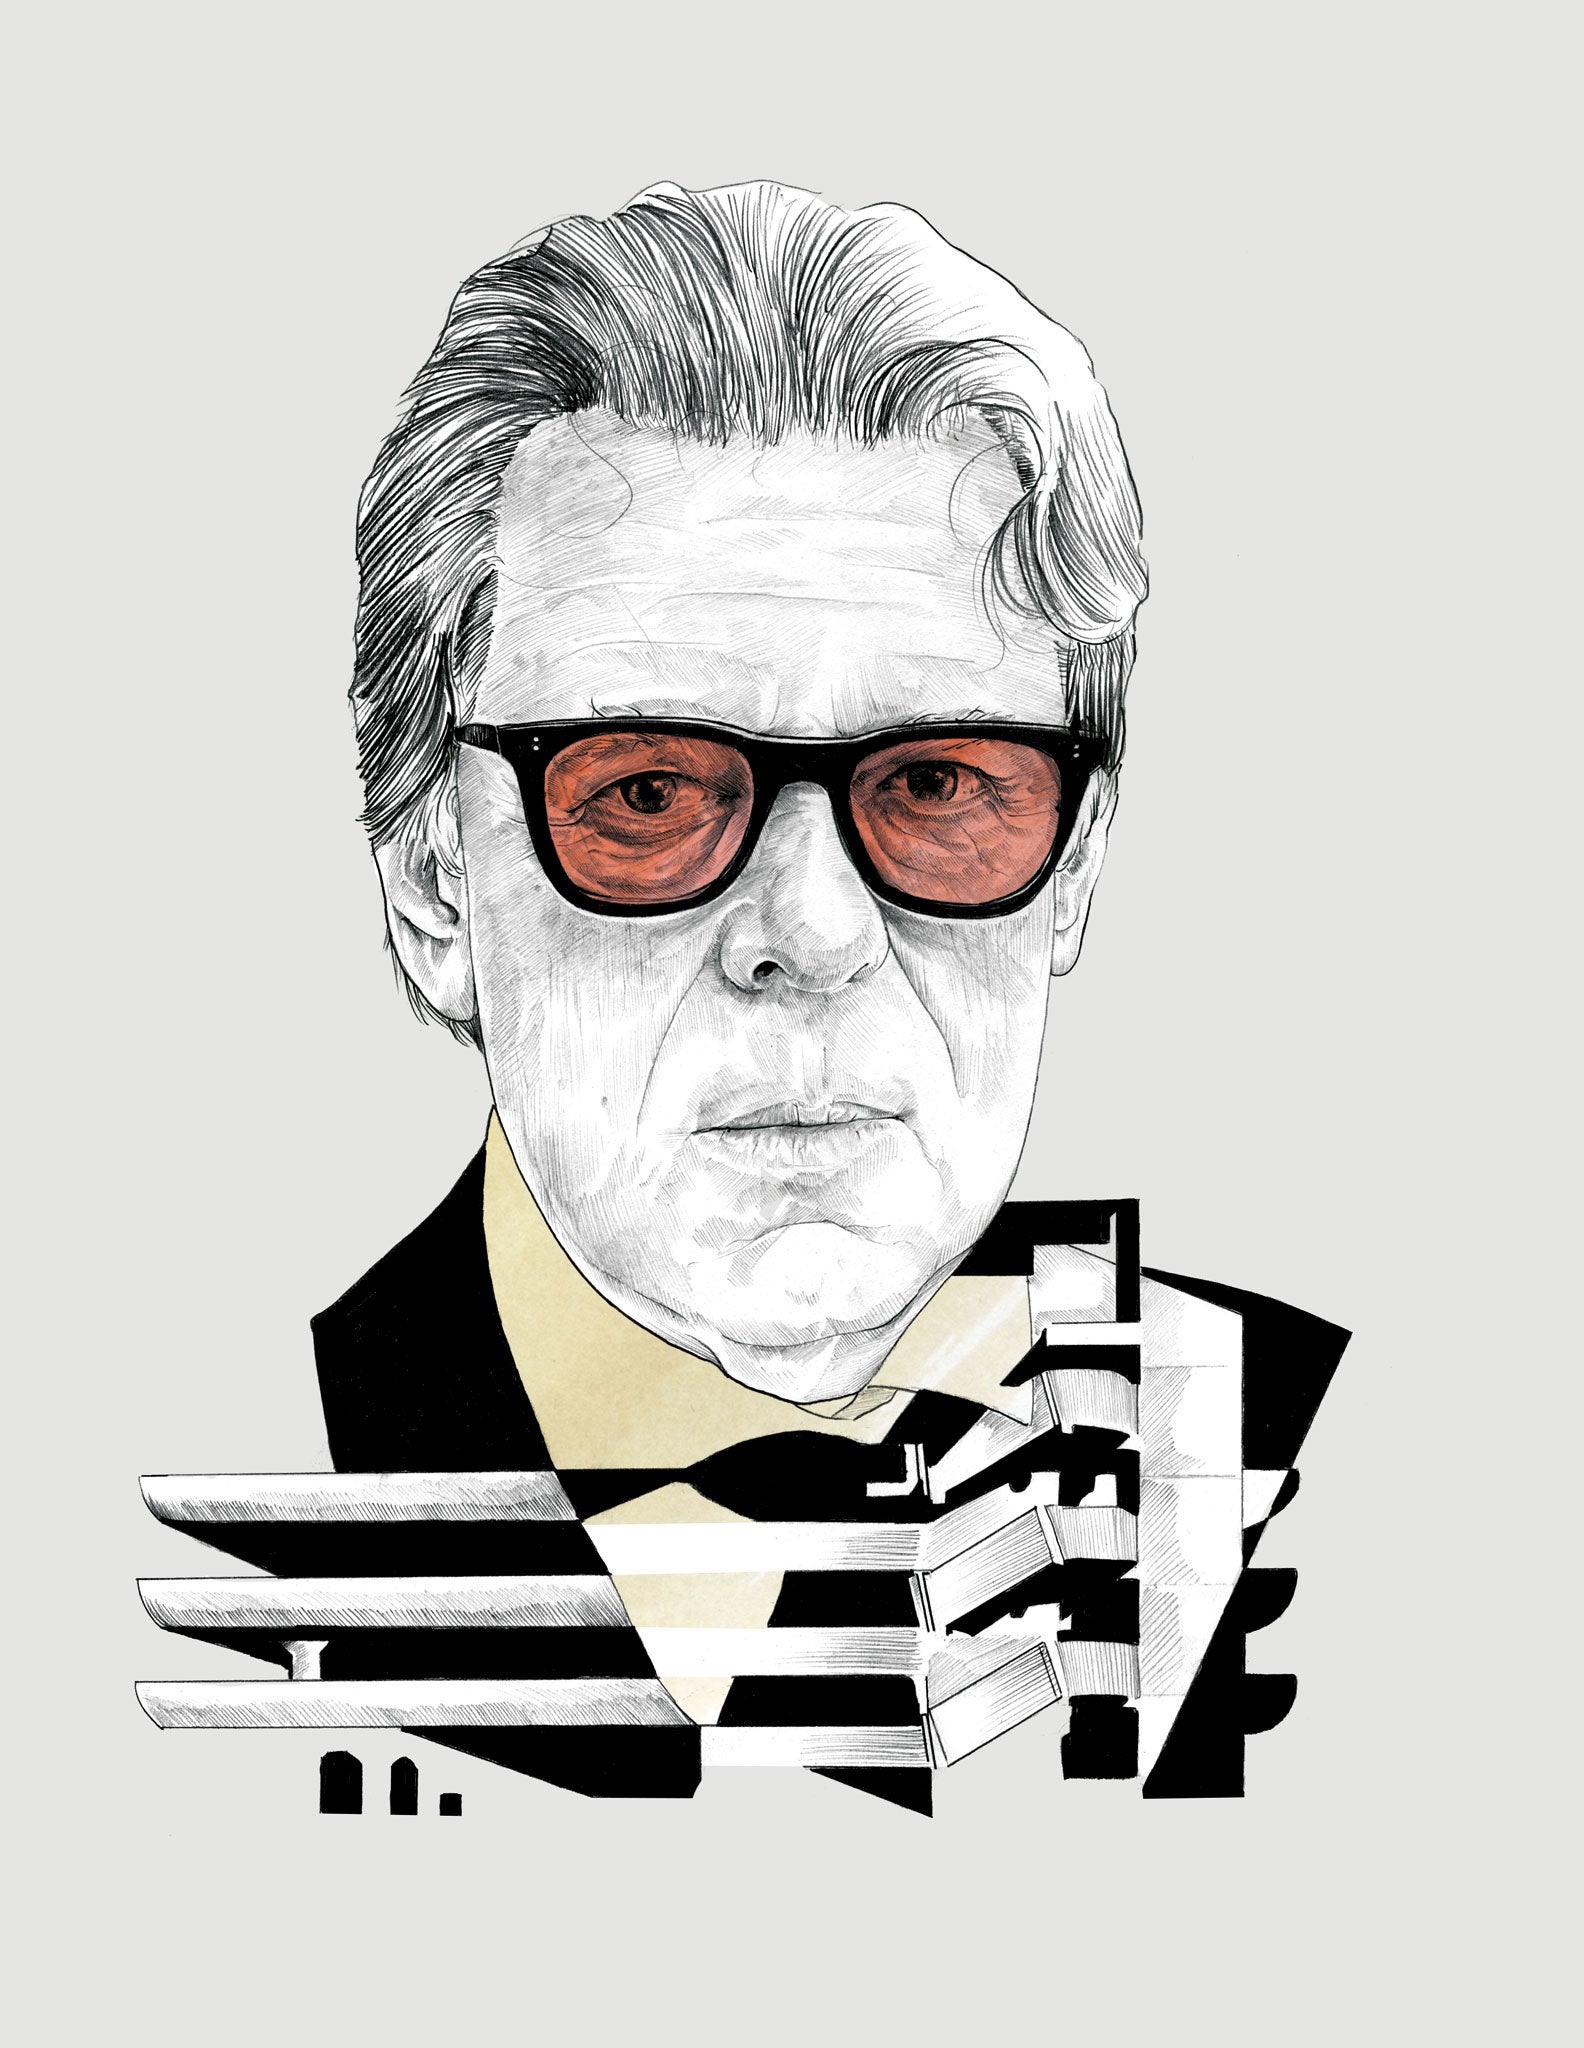 Age has not withered Meades' infinite variety